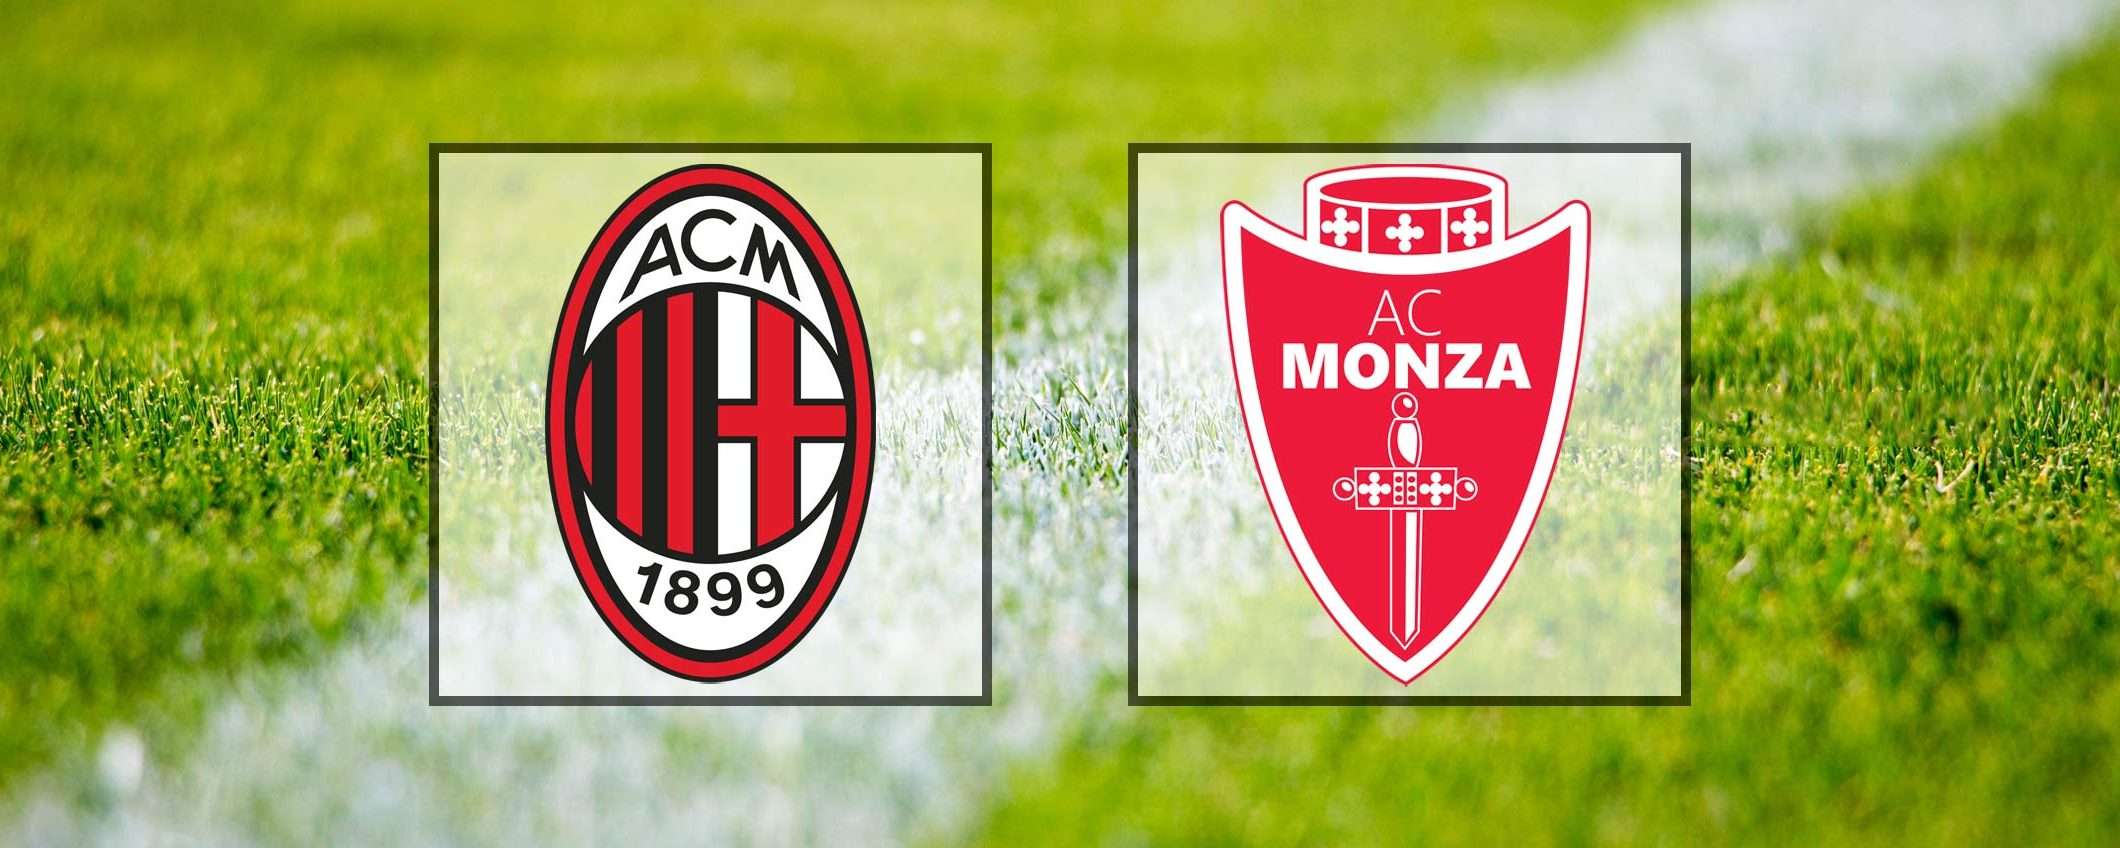 Come vedere Milan-Monza in streaming (Serie A)